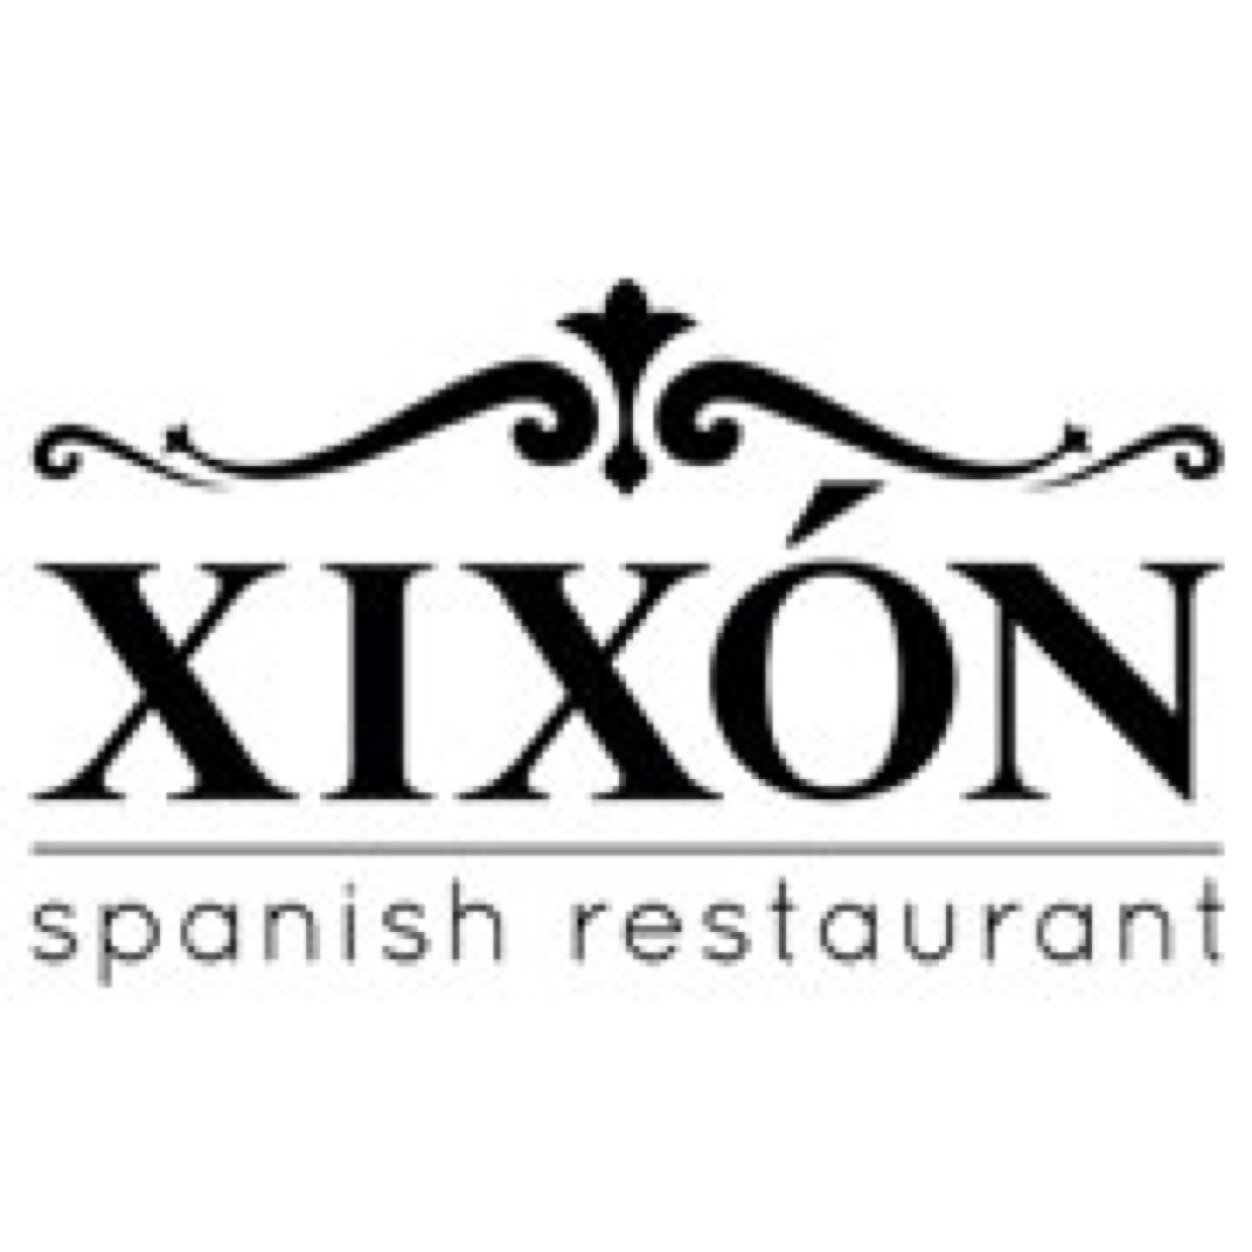 Xixón is committed in providing our customers the best Spain has to offer in terms of its diverse regional cuisines including Tapas & Wines. 305-854-9350.